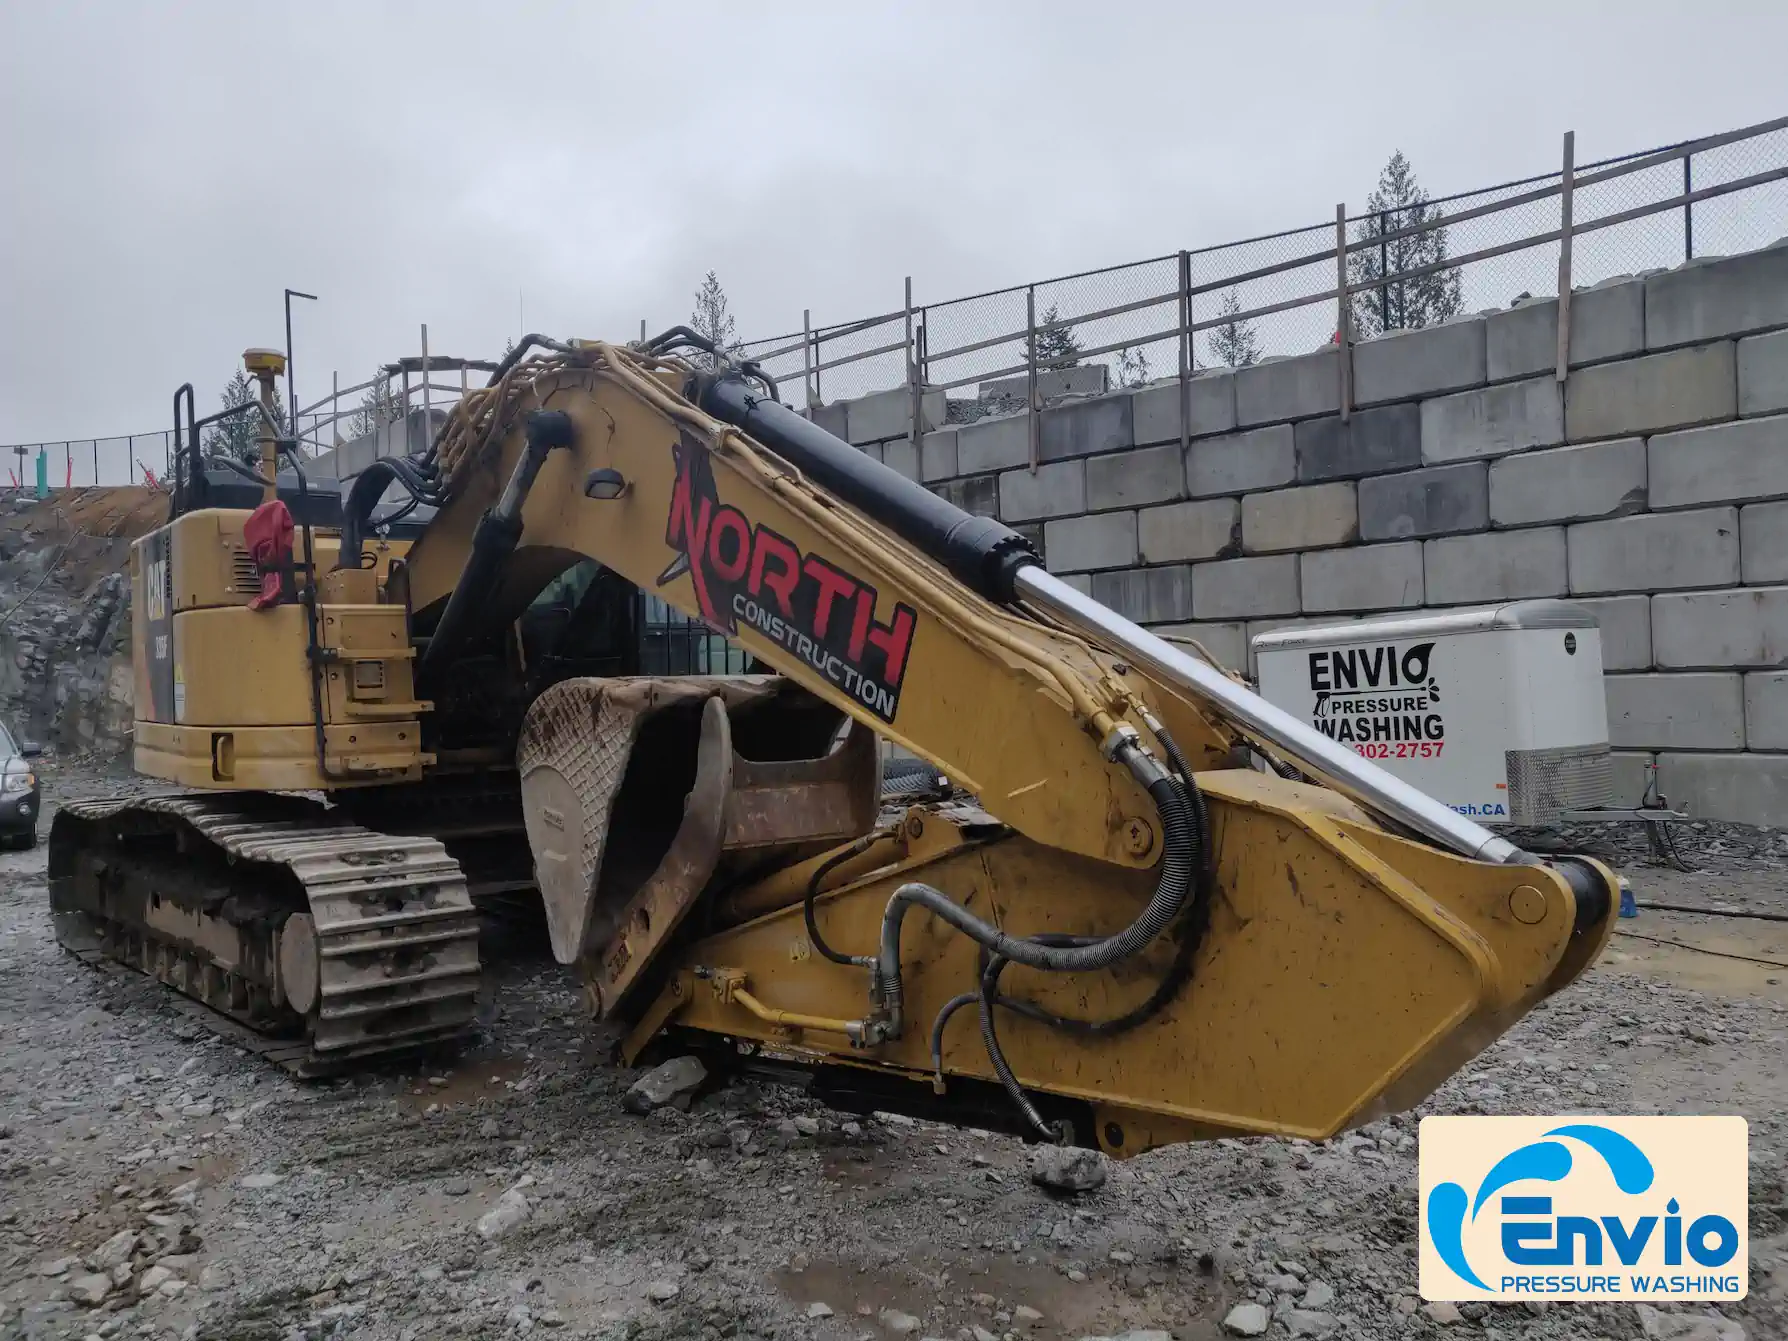 Large excavator cleaning and degreasing before